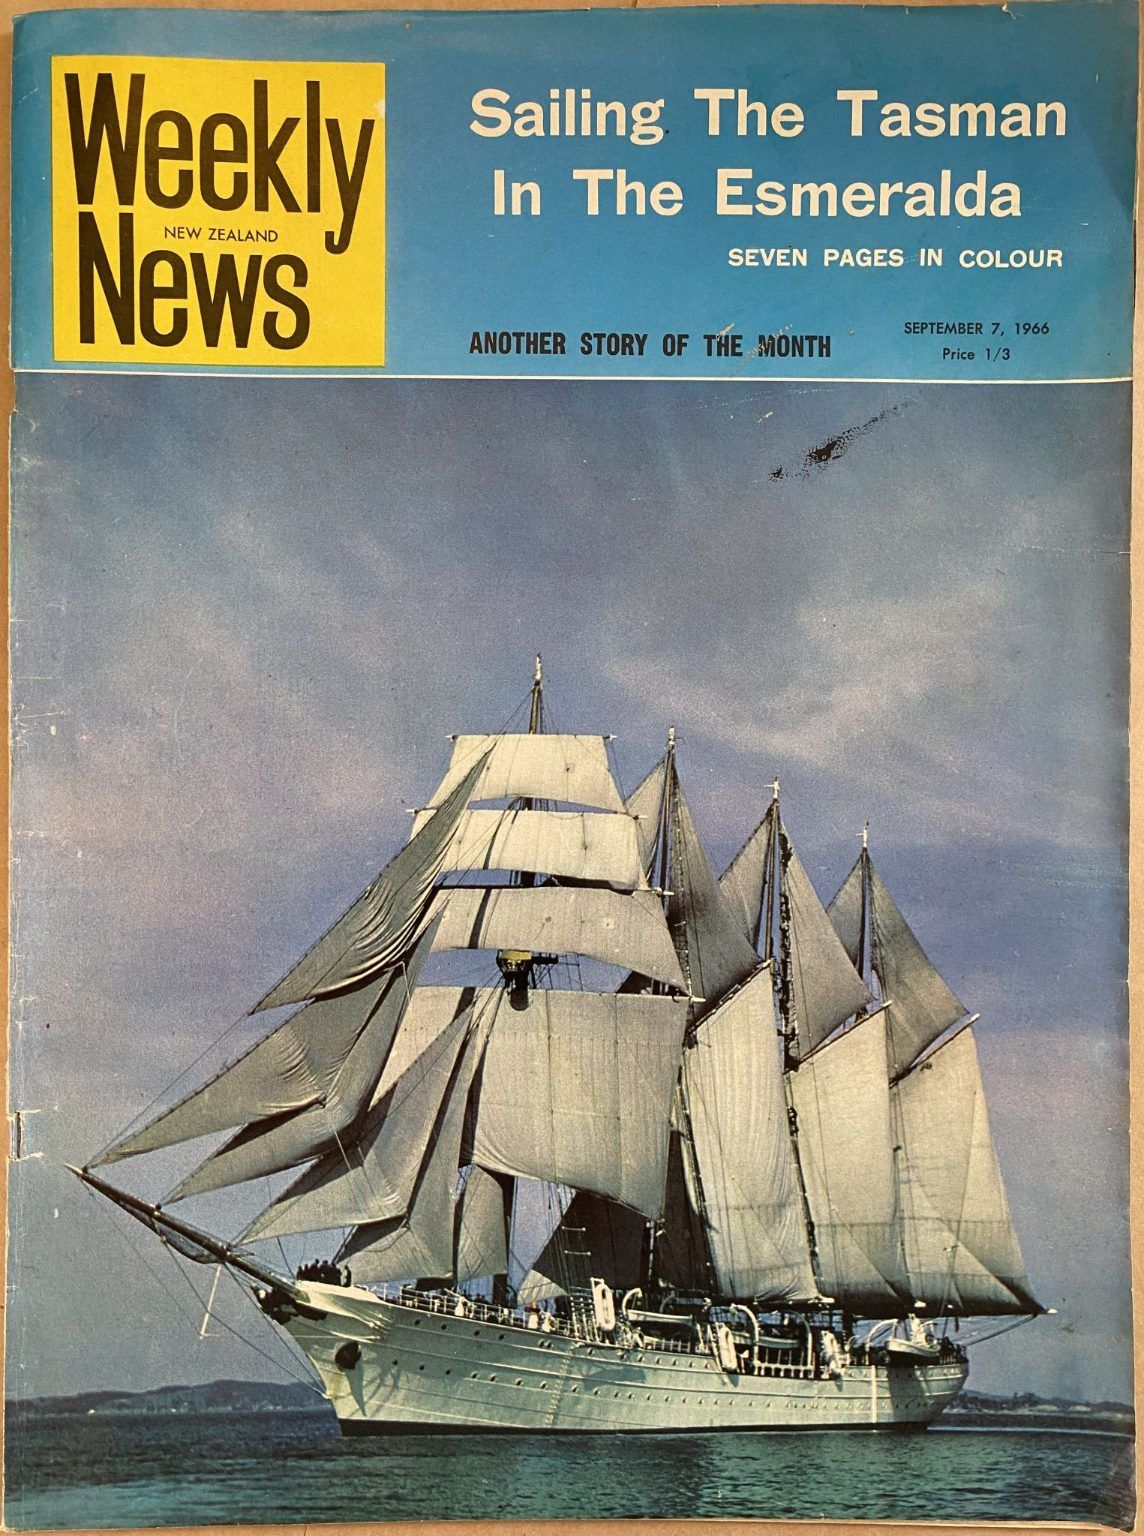 OLD NEWSPAPER: New Zealand Weekly News, No. 5363, 7 September 1966